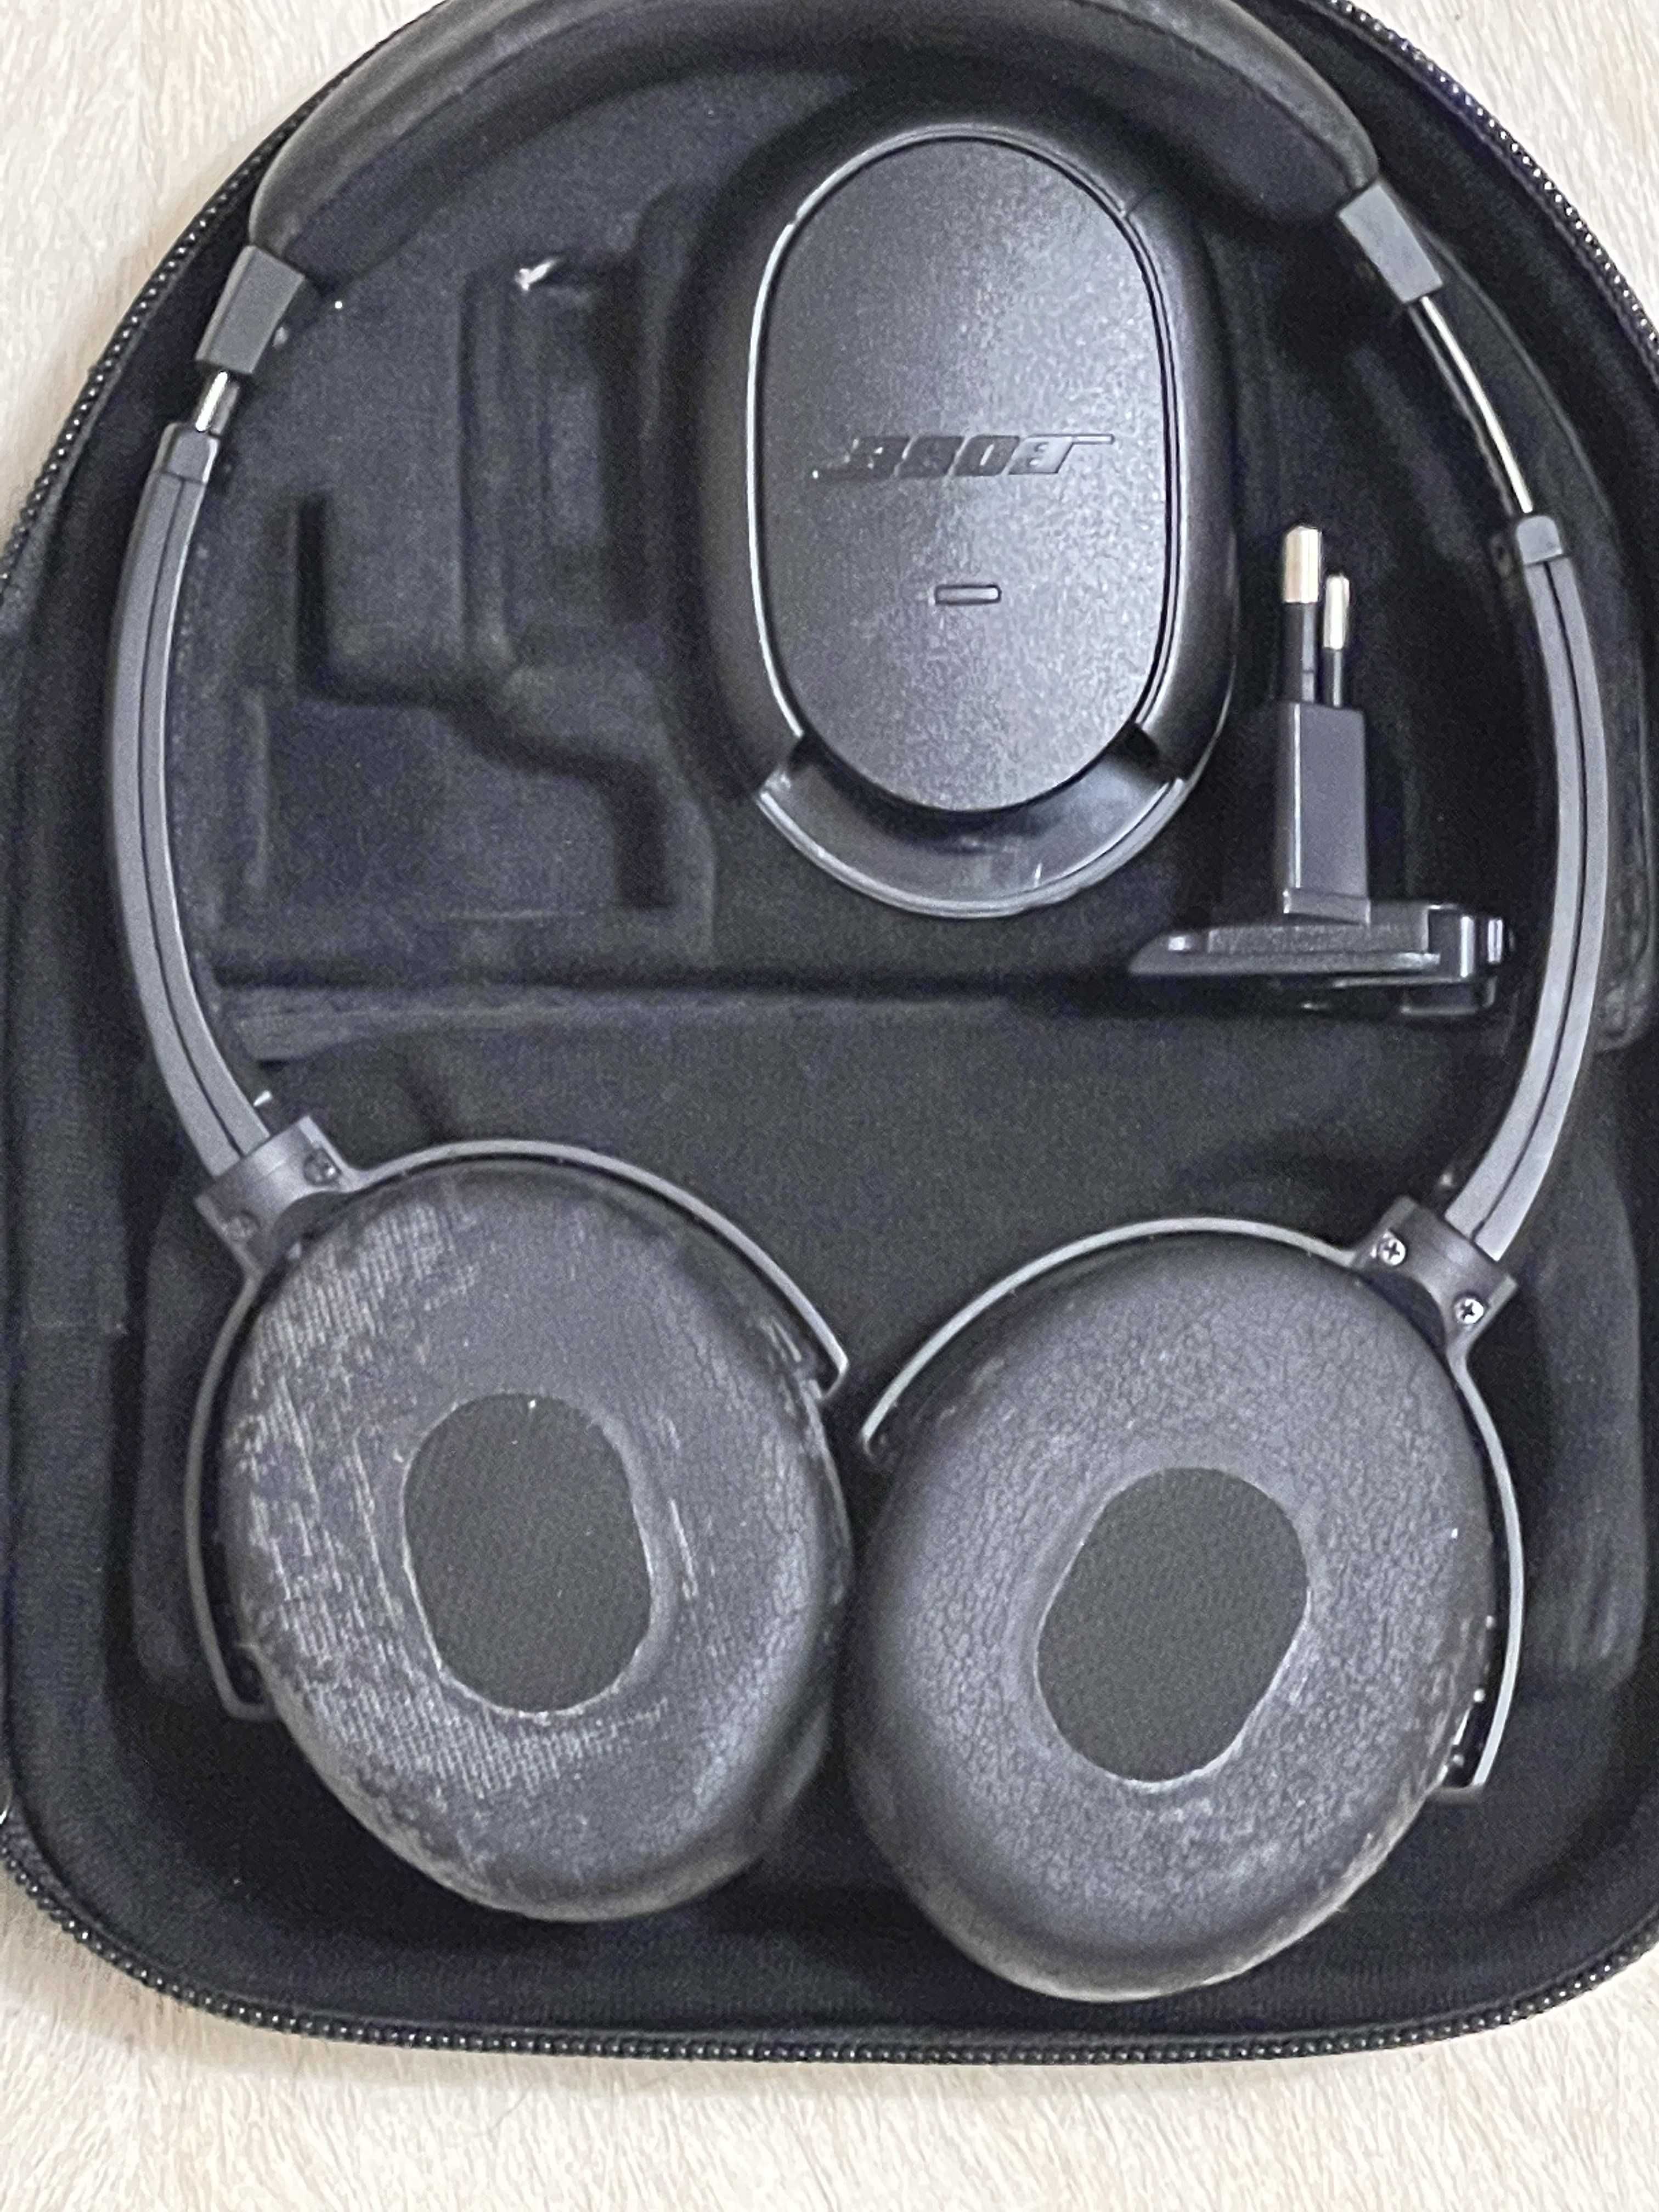 Auscultadores Bose QC 3 -  Noise Cancelling Wired Headphones